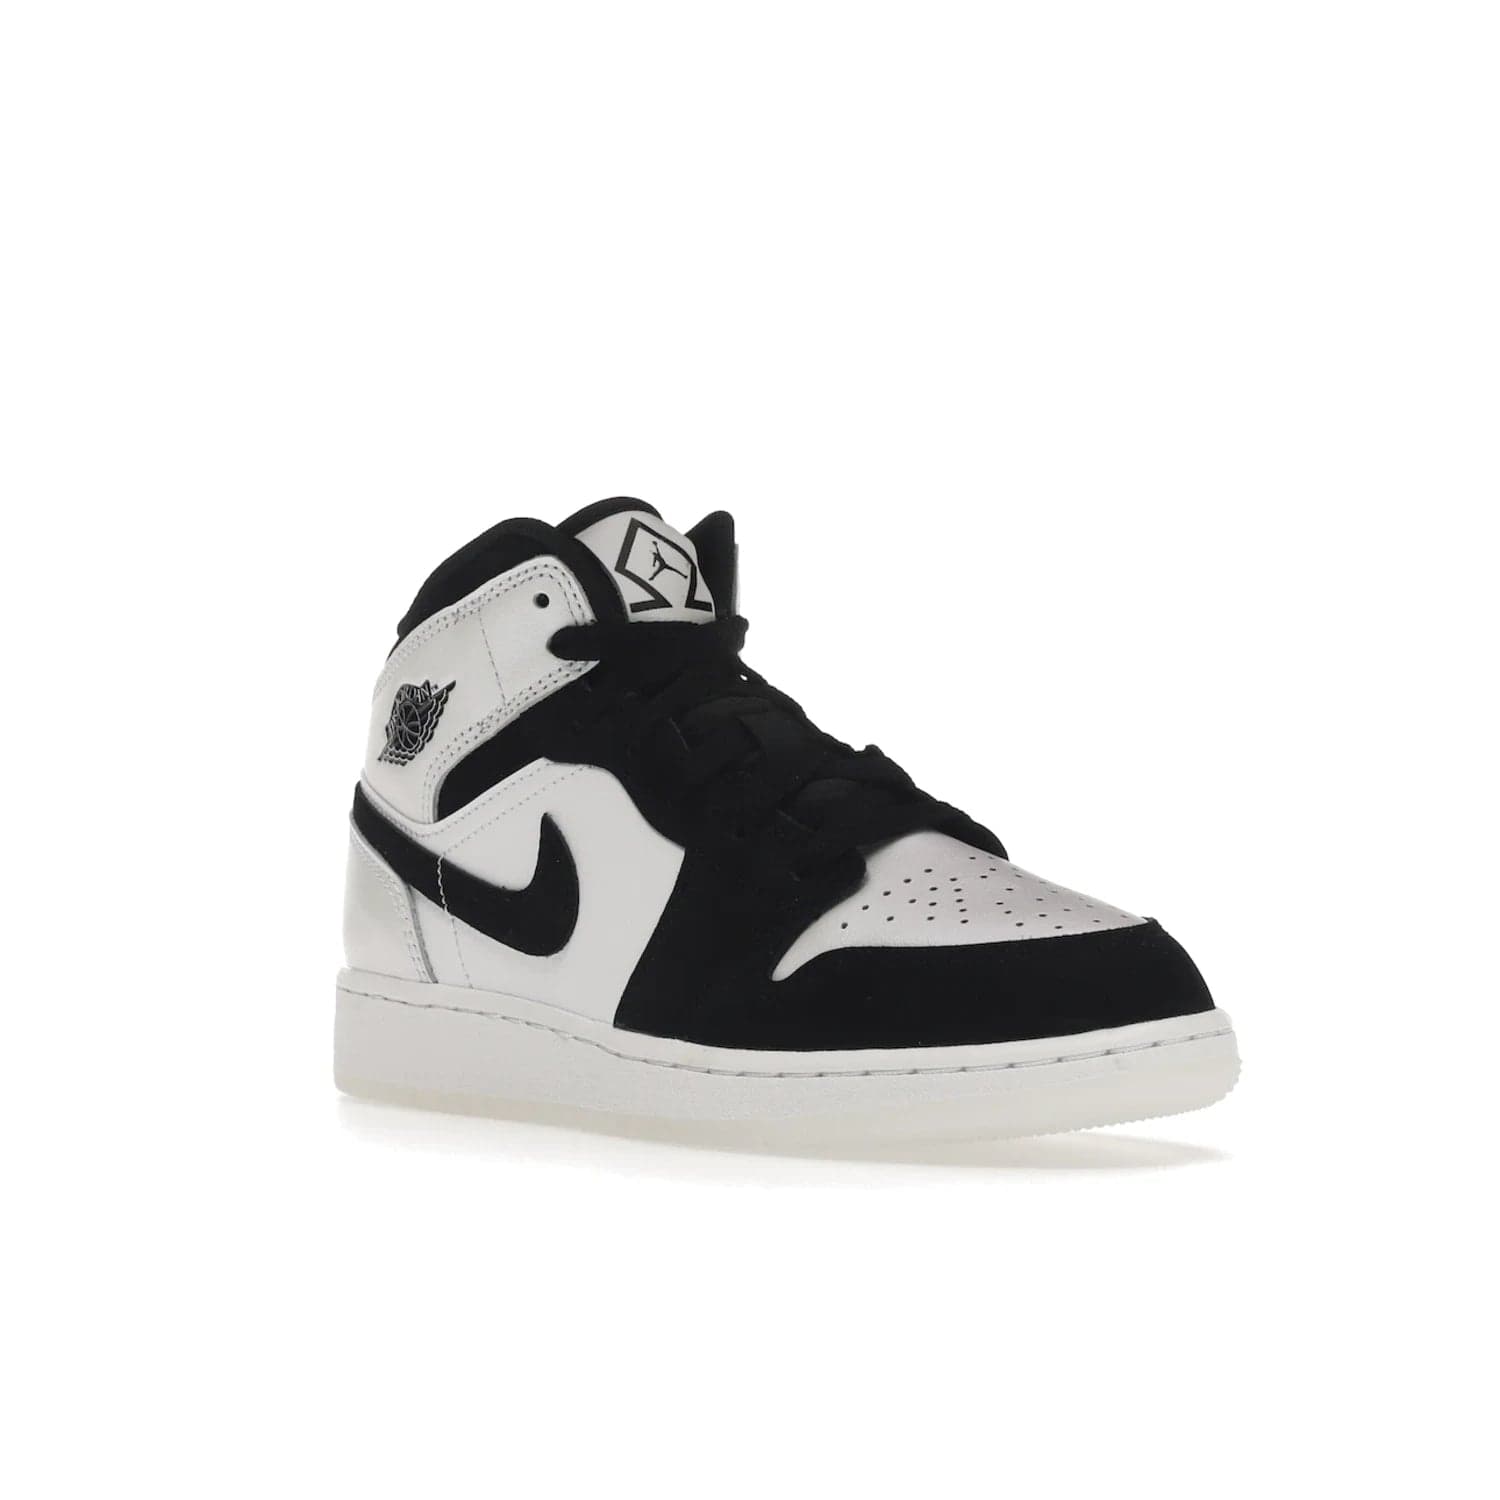 Jordan 1 Mid Diamond Shorts (GS) - Image 6 - Only at www.BallersClubKickz.com - Get the Jordan 1 Mid Diamond Shorts GS on 9th Feb 2022! Features a white, black & suede design with nylon tongue, stamped wings logo, rubber midsole & outsole. Only $100!